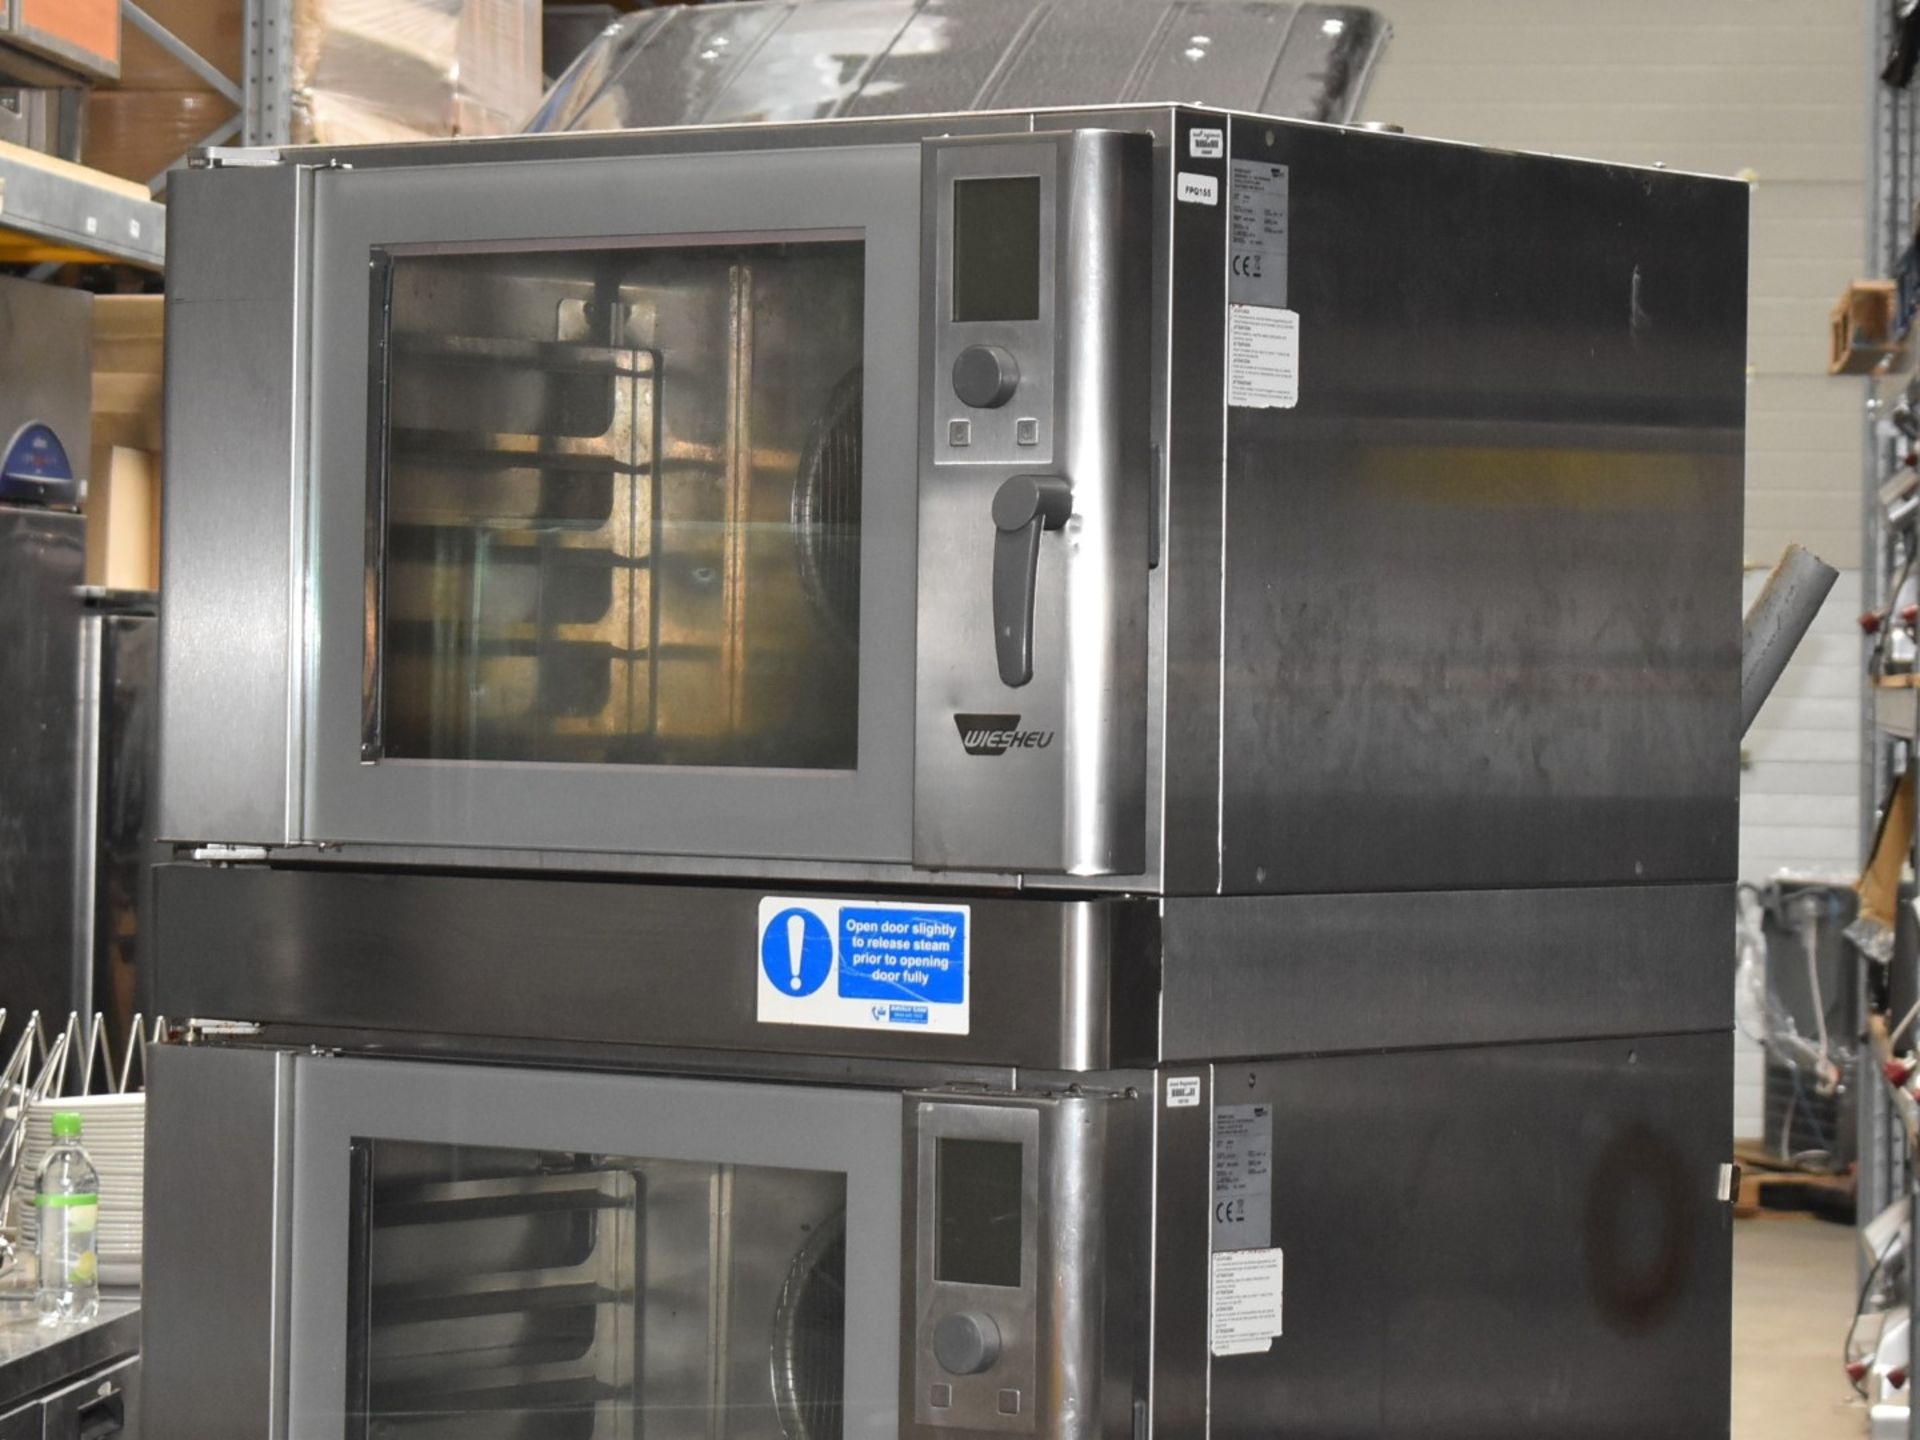 1 x Wiesheu B4-E2 Duo Commercial Convection Oven With Stainless Steel Exterior - Image 6 of 12